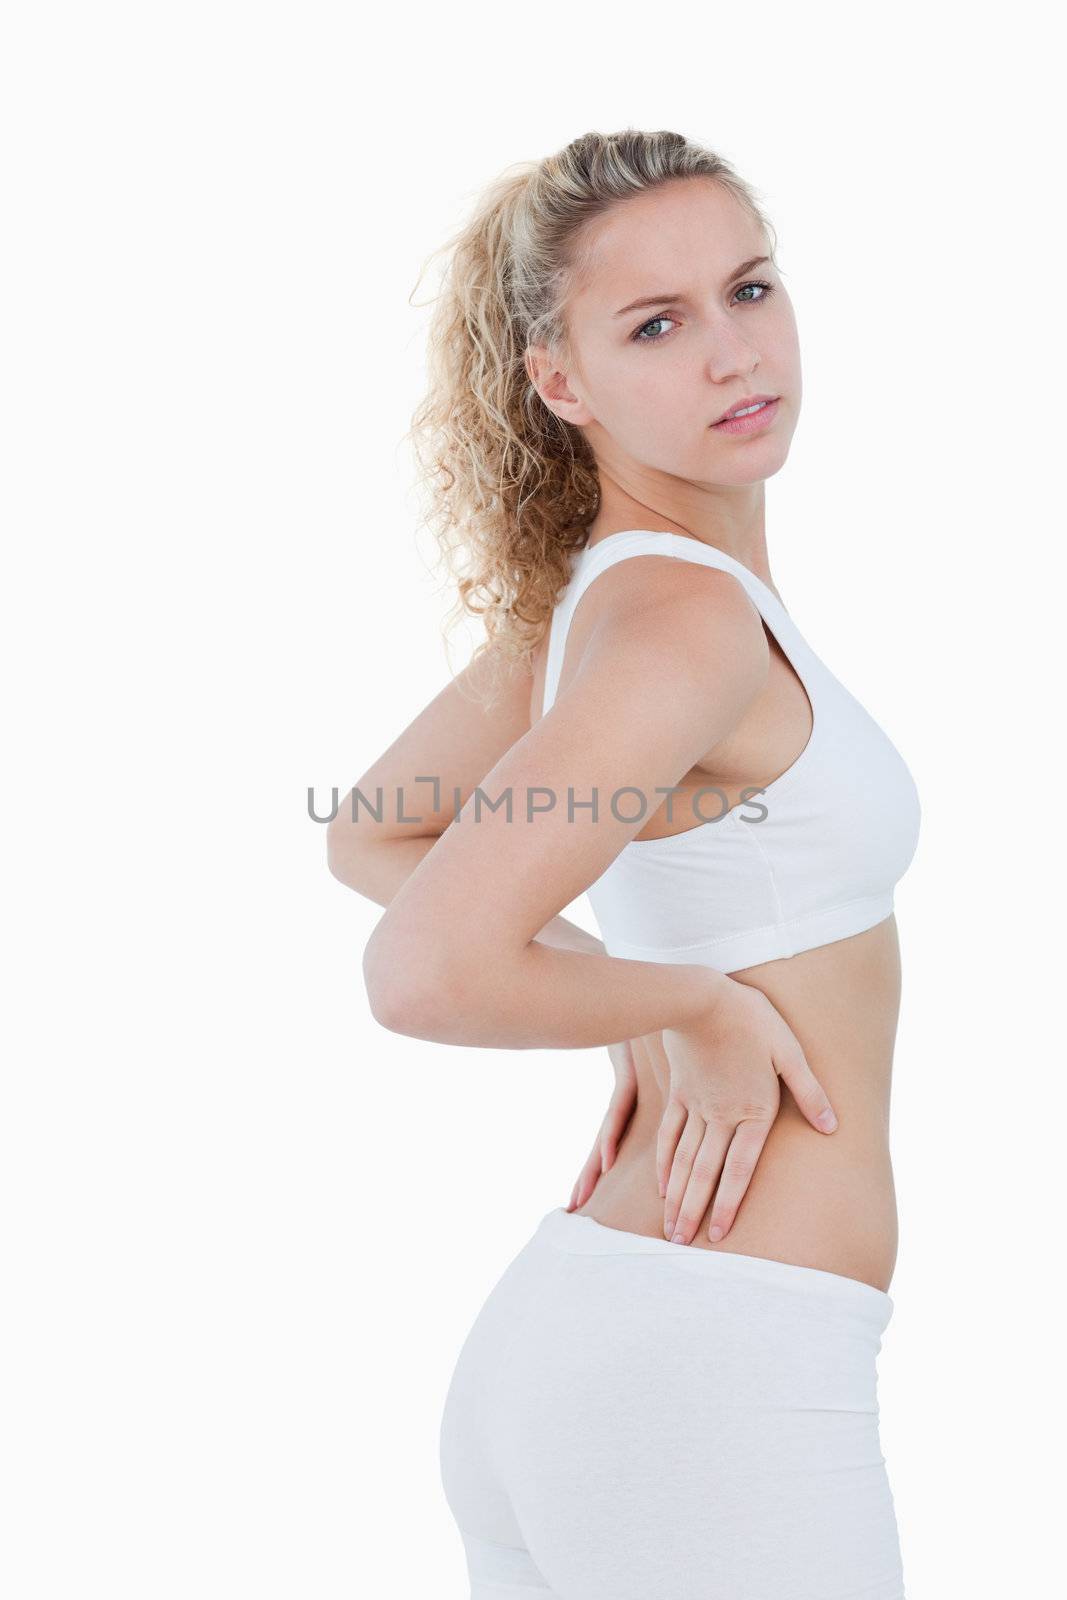 Young attractive woman touching her back against a white background